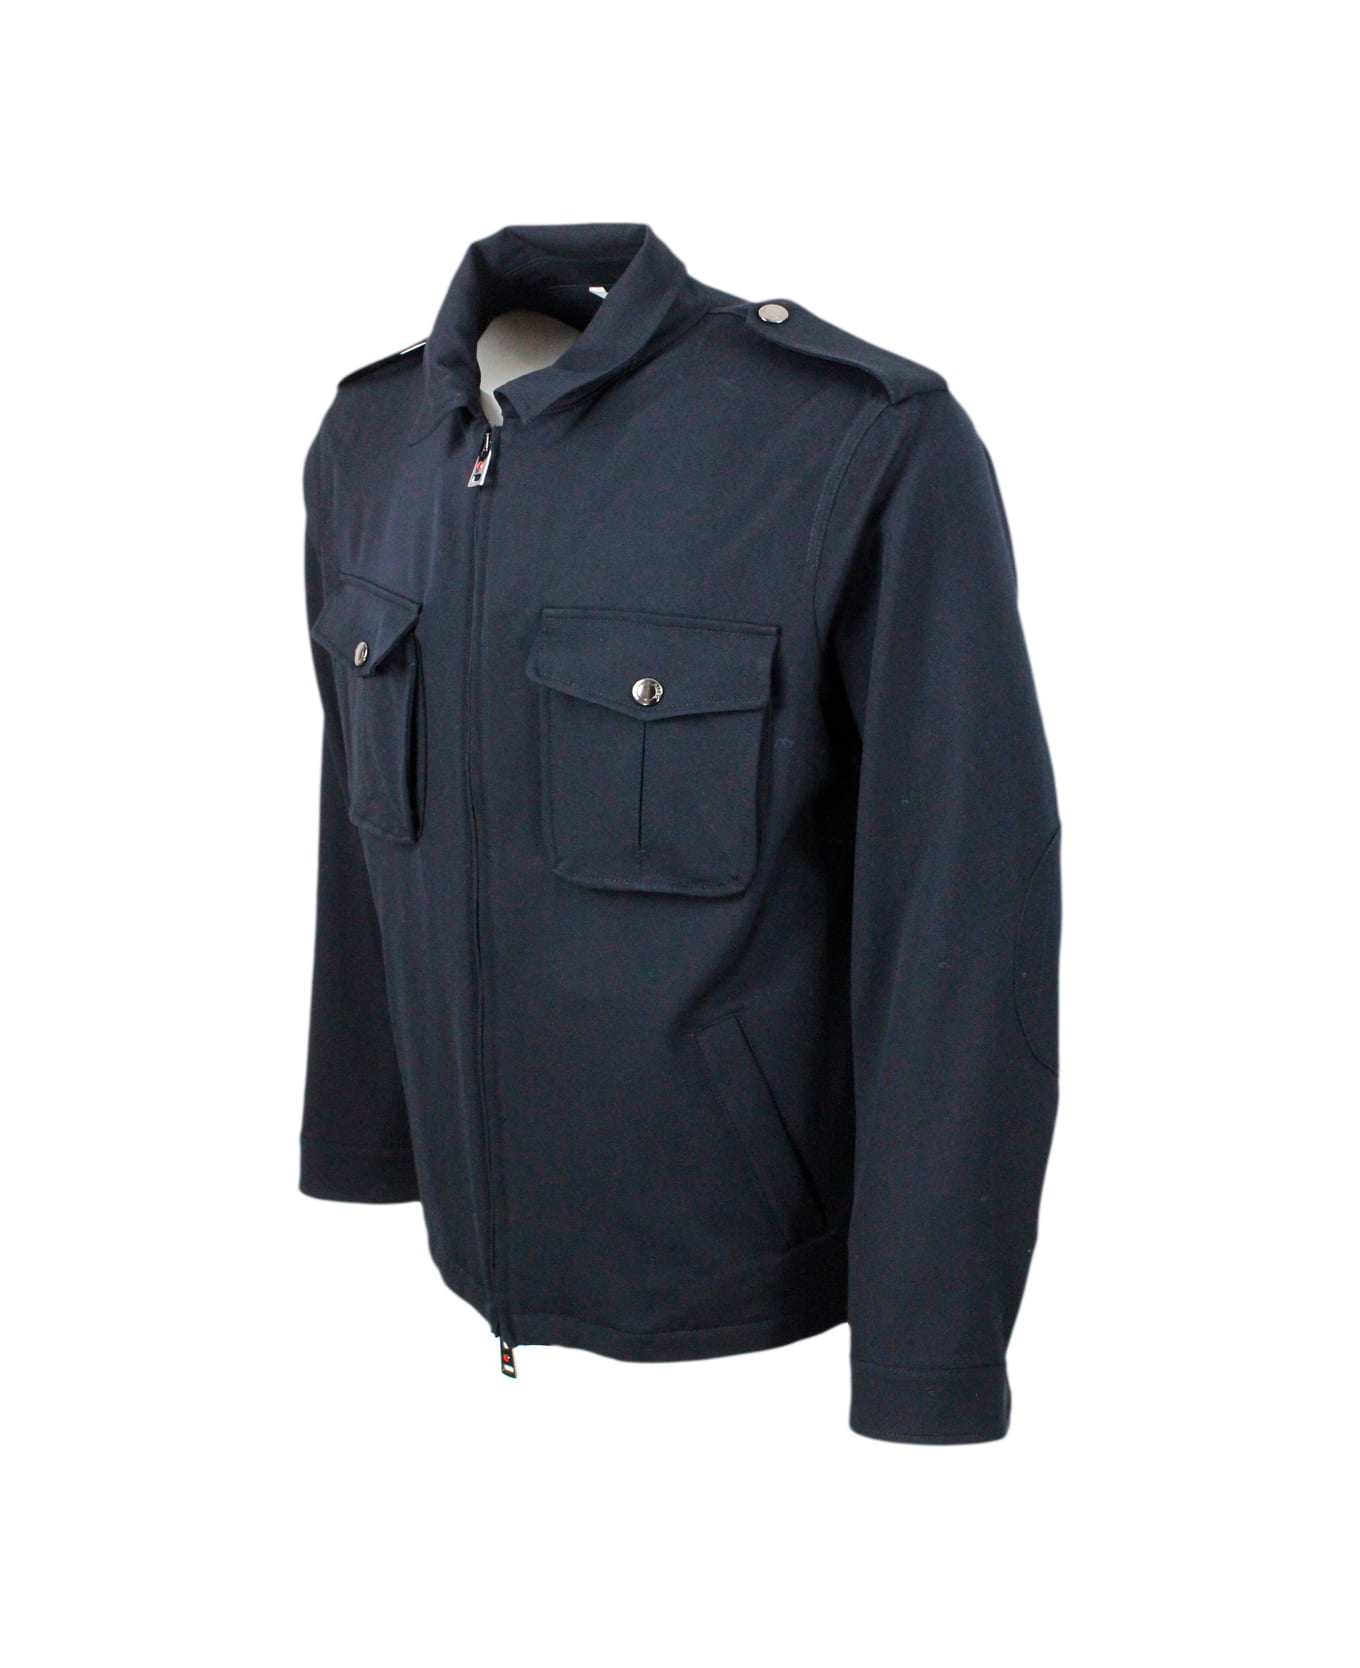 Kired Jacket In Special Stretch Water-repellent Wool Canvas Fabric With Standing Collar And Patch Pockets On The Chest. Zip Closure - Blu